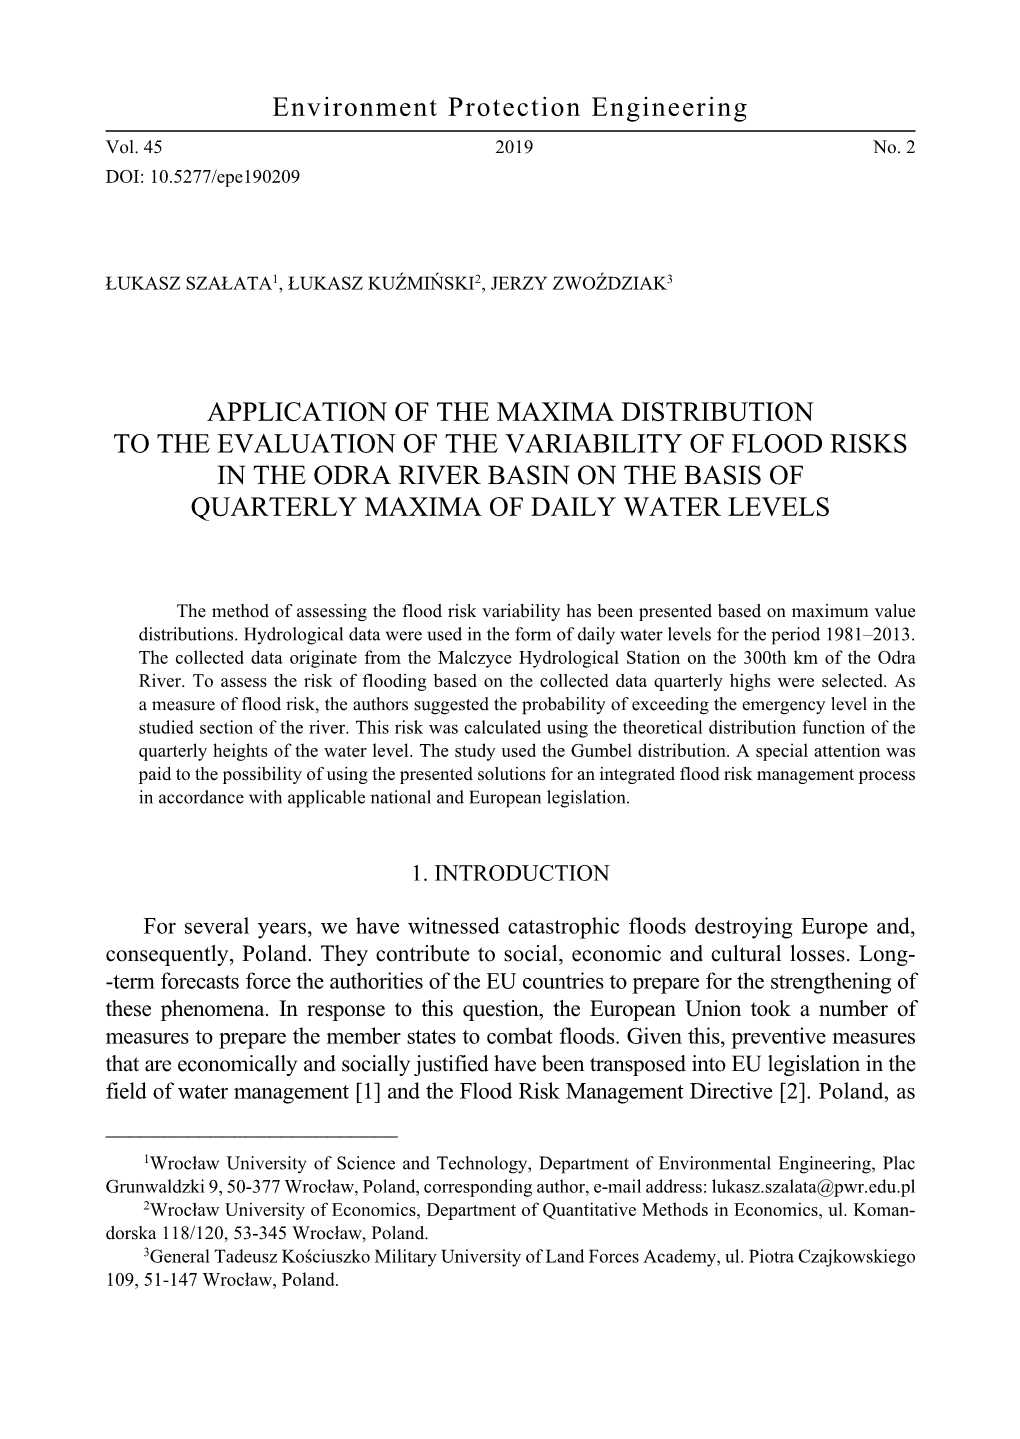 Environment Protection Engineering APPLICATION of the MAXIMA DISTRIBUTION to the EVALUATION of the VARIABILITY of FLOOD RISKS I